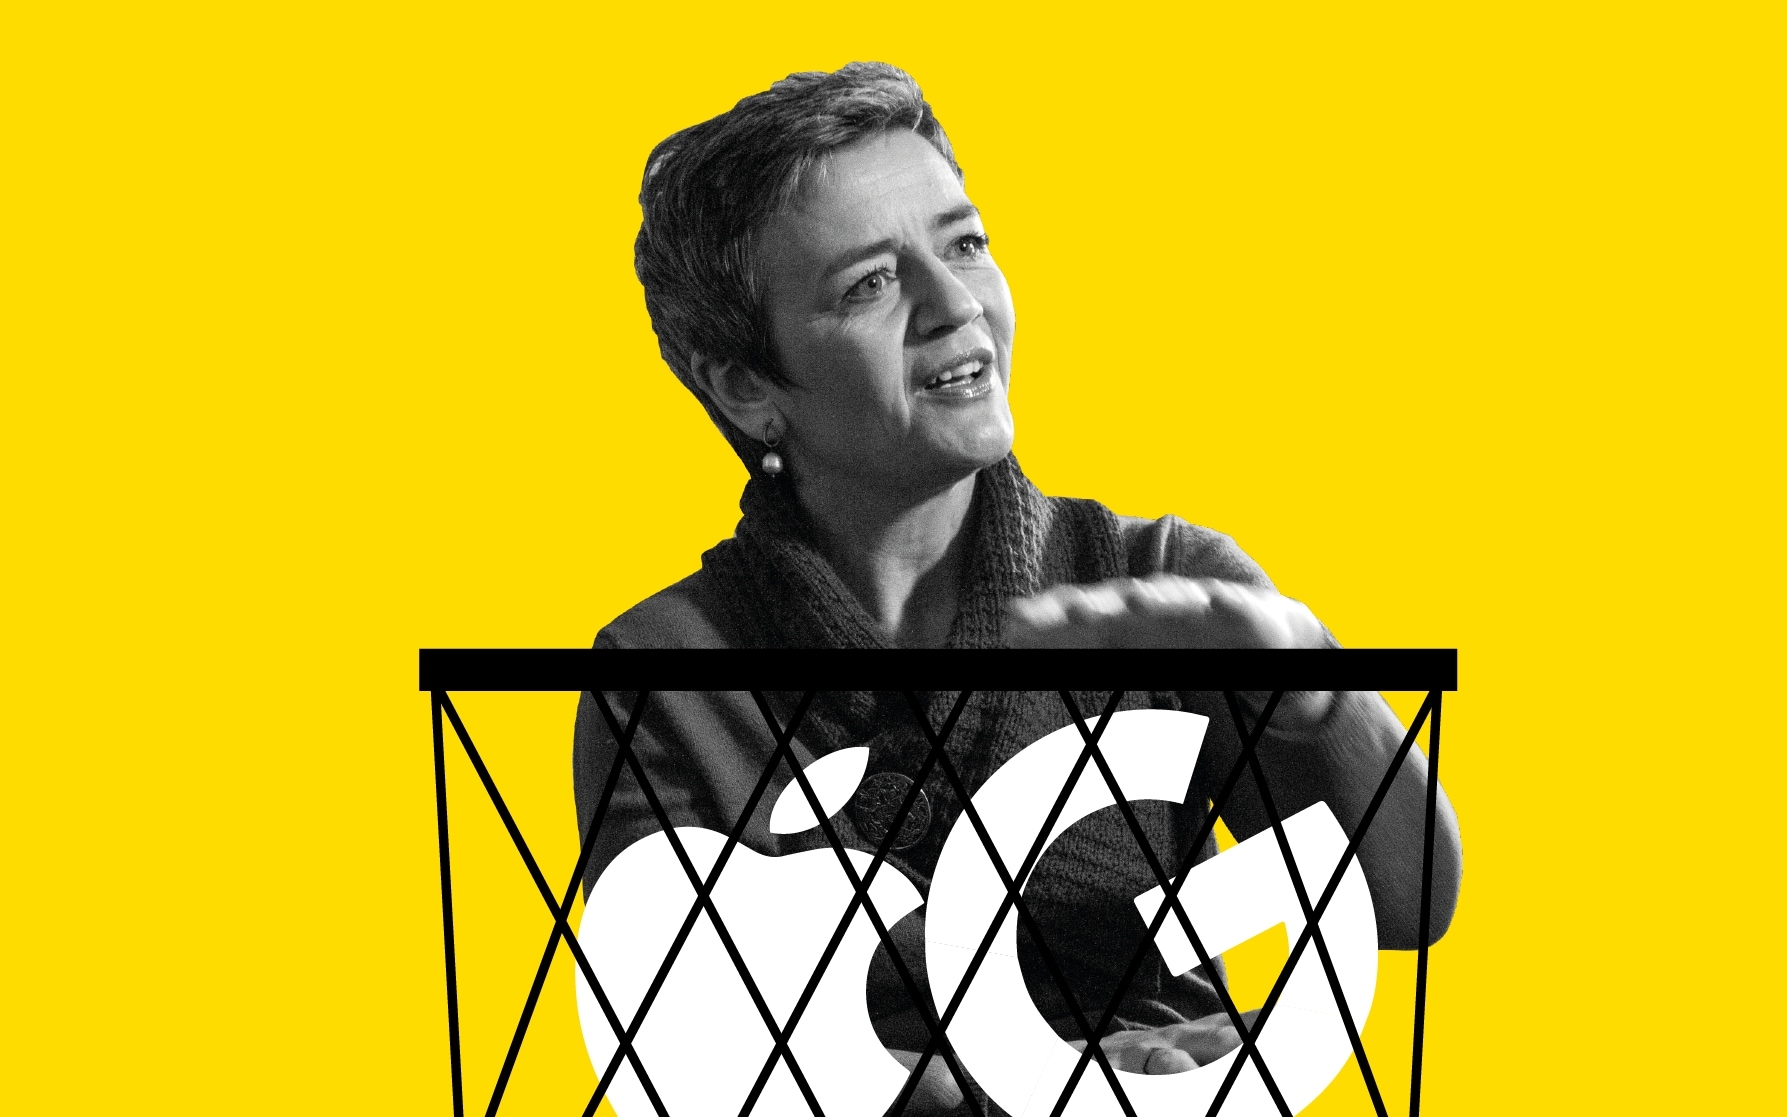 Trump And The Tech Giants Beware - Vestager's Back With EU 'Super Powers' | DeviceDaily.com